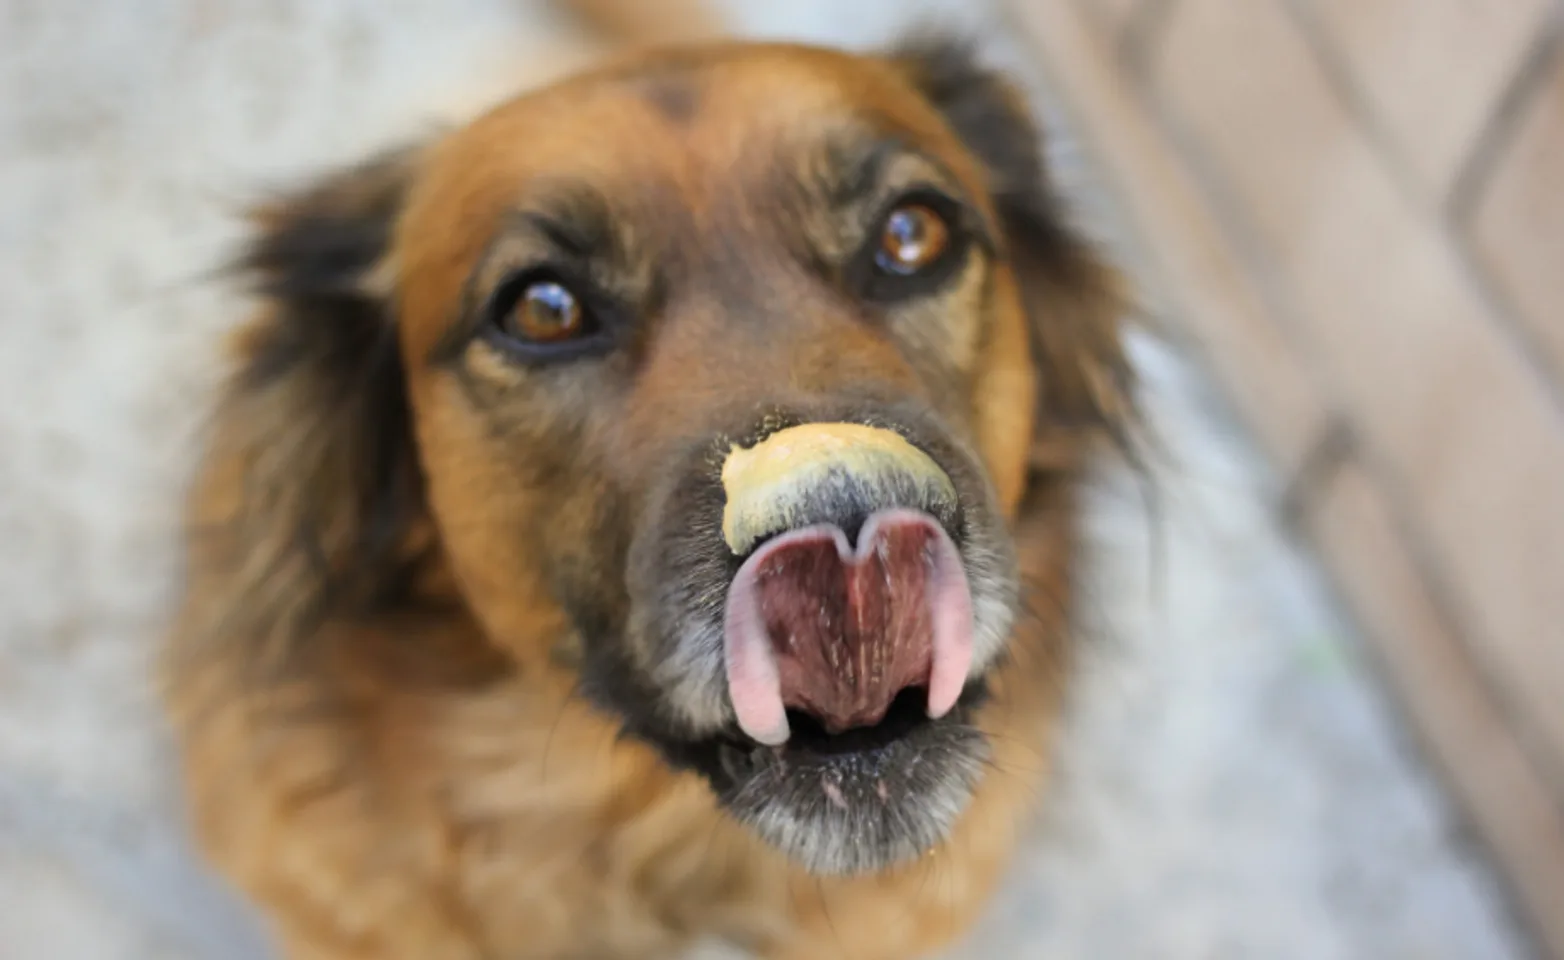 Dog Licking Peanut Butter on its Nose